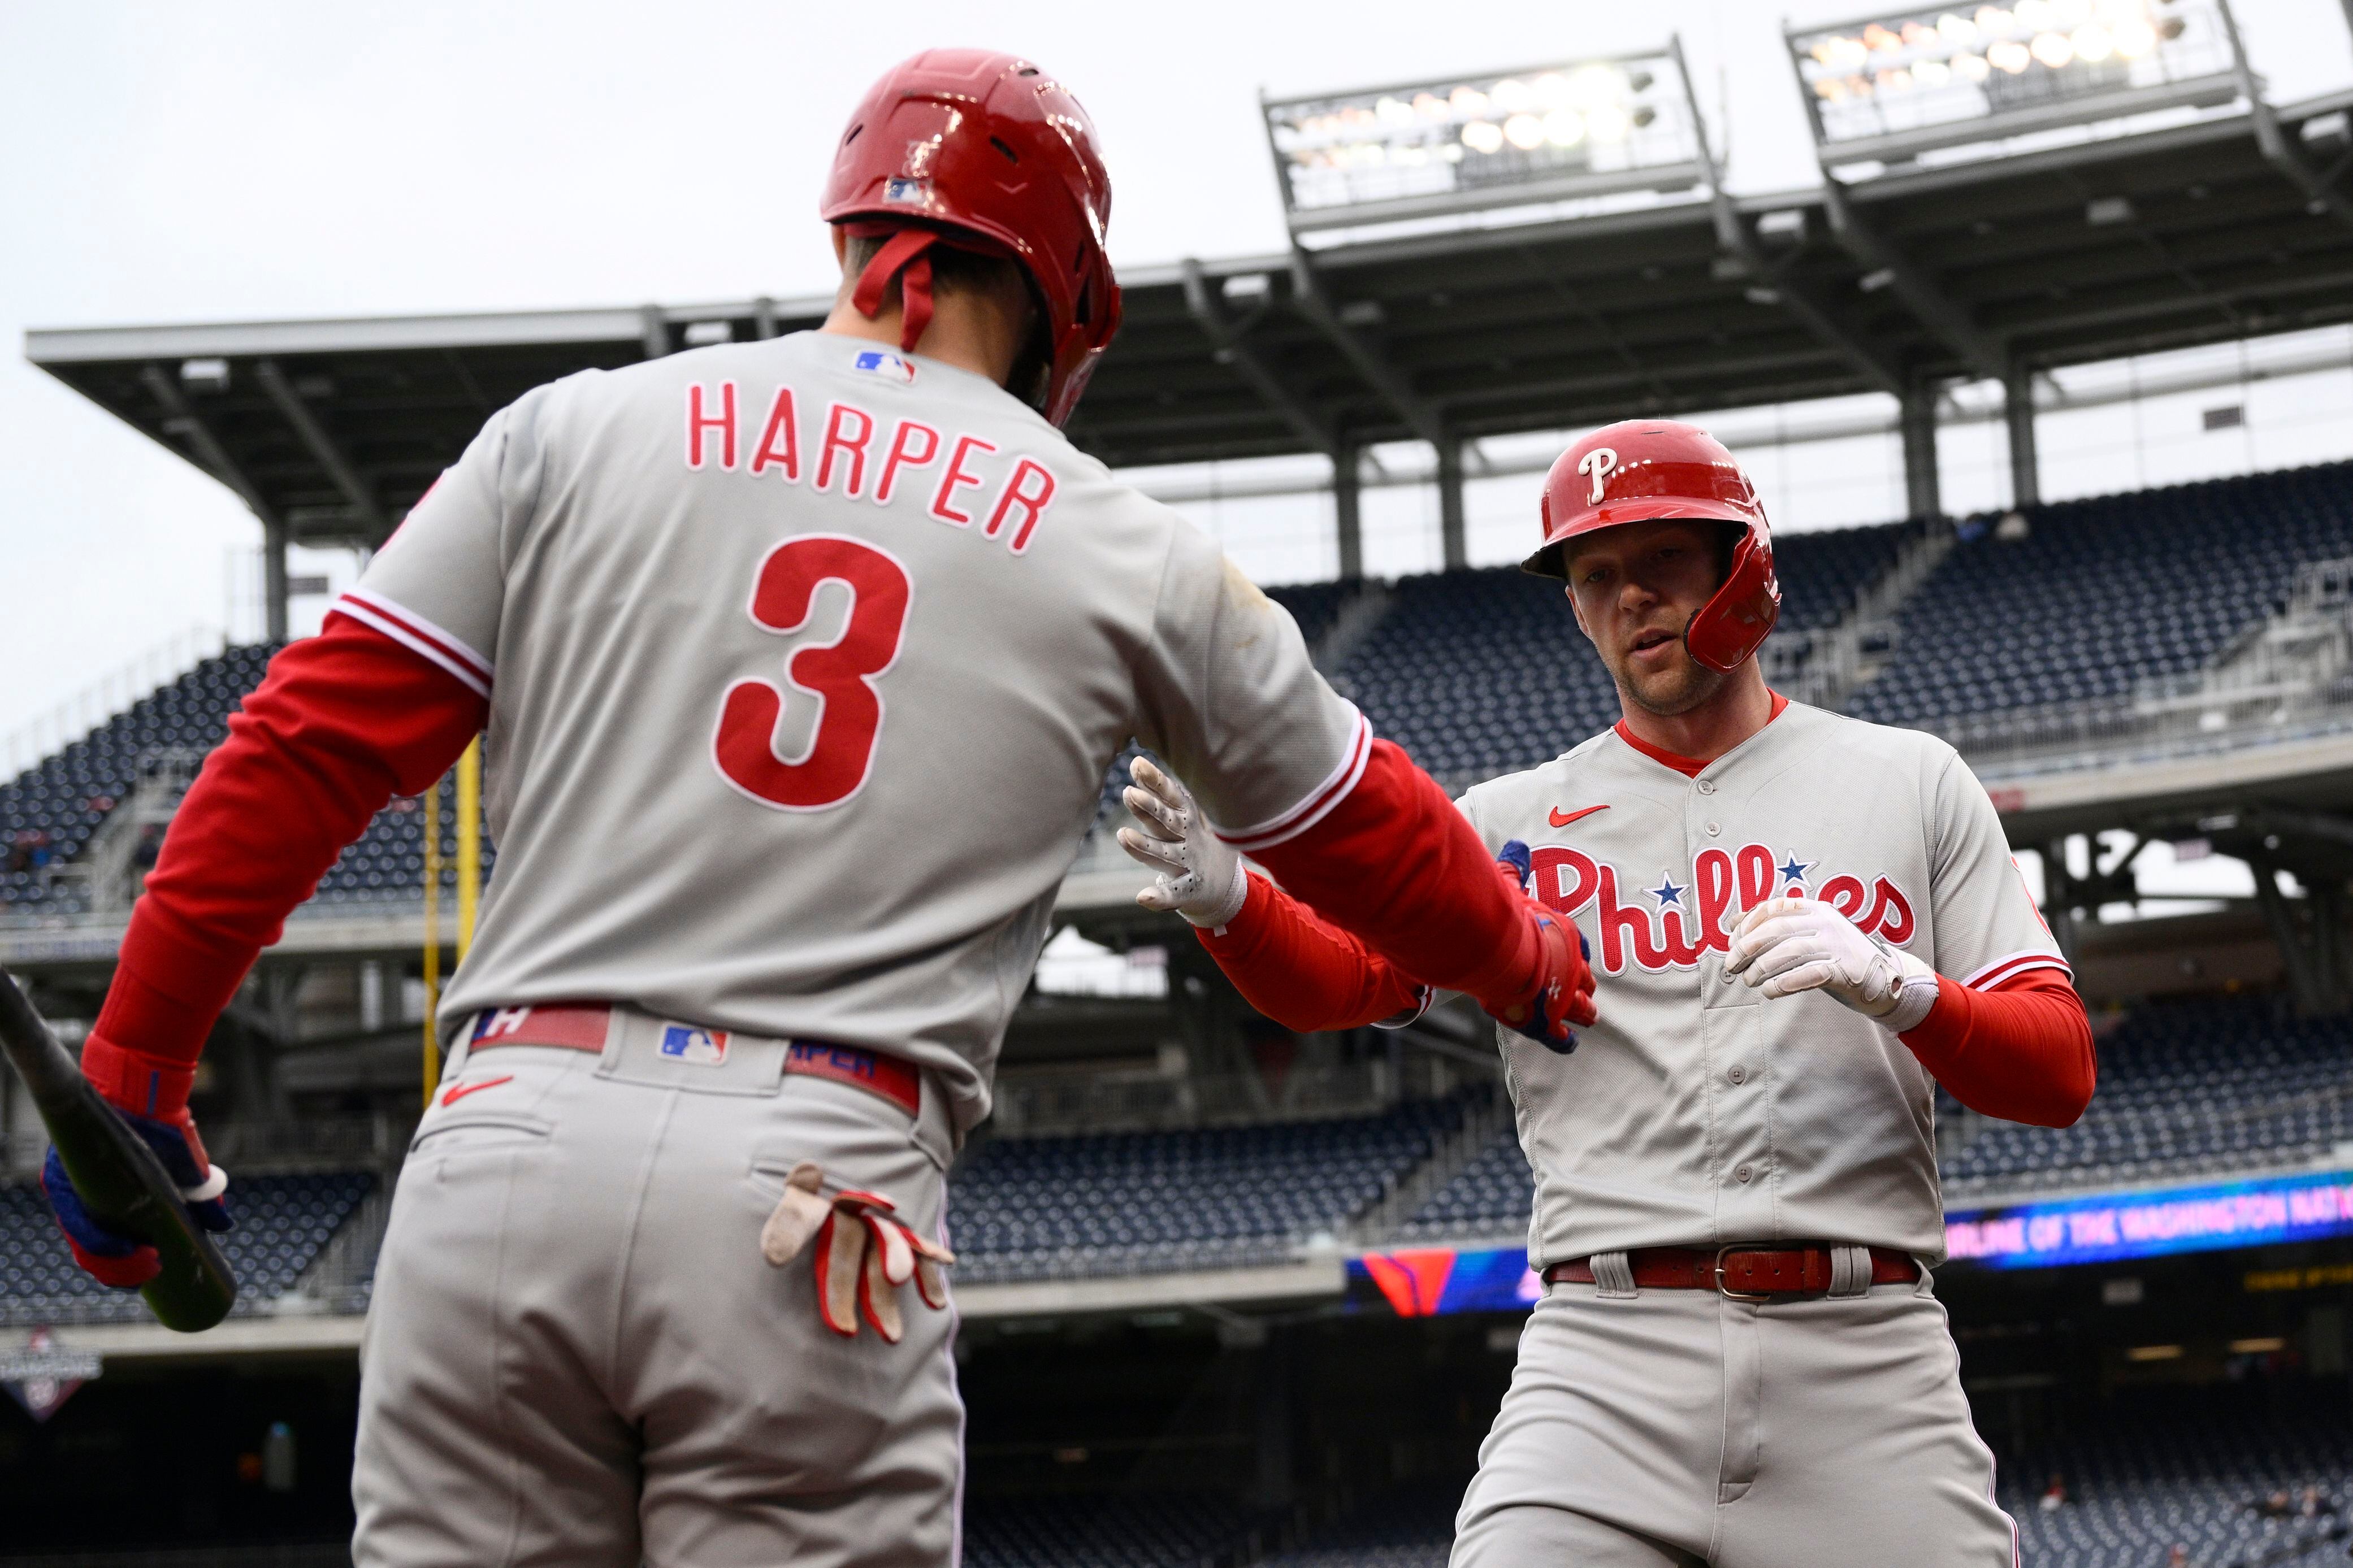 Nats rally to beat Phillies, catch NL champs in standings (updated) - Blog